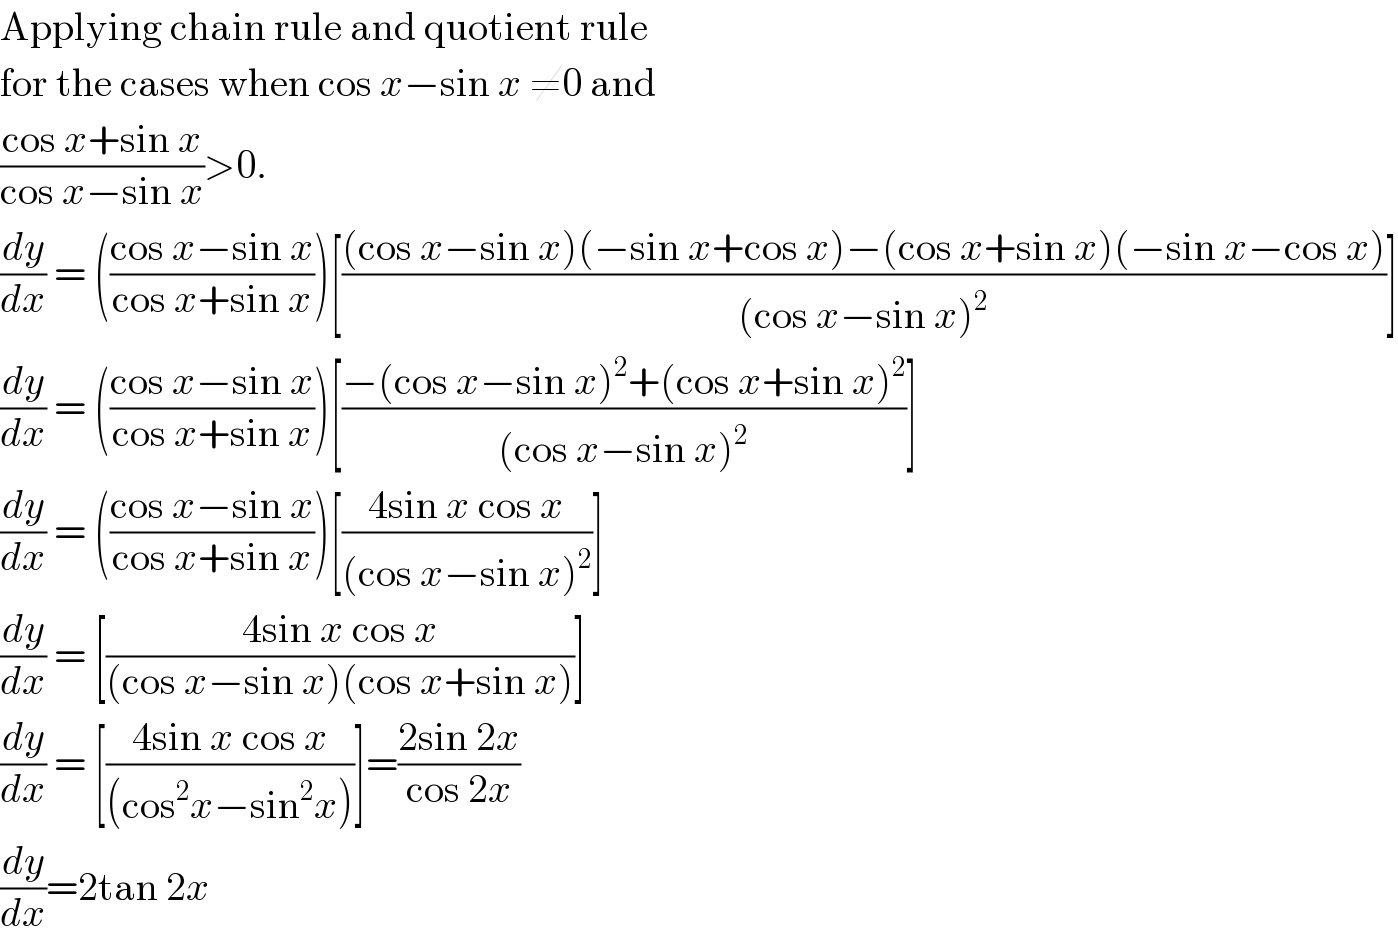 Applying chain rule and quotient rule   for the cases when cos x−sin x ≠0 and  ((cos x+sin x)/(cos x−sin x))>0.  (dy/dx) = (((cos x−sin x)/(cos x+sin x)))[(((cos x−sin x)(−sin x+cos x)−(cos x+sin x)(−sin x−cos x))/((cos x−sin x)^2 ))]  (dy/dx) = (((cos x−sin x)/(cos x+sin x)))[((−(cos x−sin x)^2 +(cos x+sin x)^2 )/((cos x−sin x)^2 ))]  (dy/dx) = (((cos x−sin x)/(cos x+sin x)))[((4sin x cos x)/((cos x−sin x)^2 ))]  (dy/dx) = [((4sin x cos x)/((cos x−sin x)(cos x+sin x)))]  (dy/dx) = [((4sin x cos x)/((cos^2 x−sin^2 x)))]=((2sin 2x)/(cos 2x))  (dy/dx)=2tan 2x  